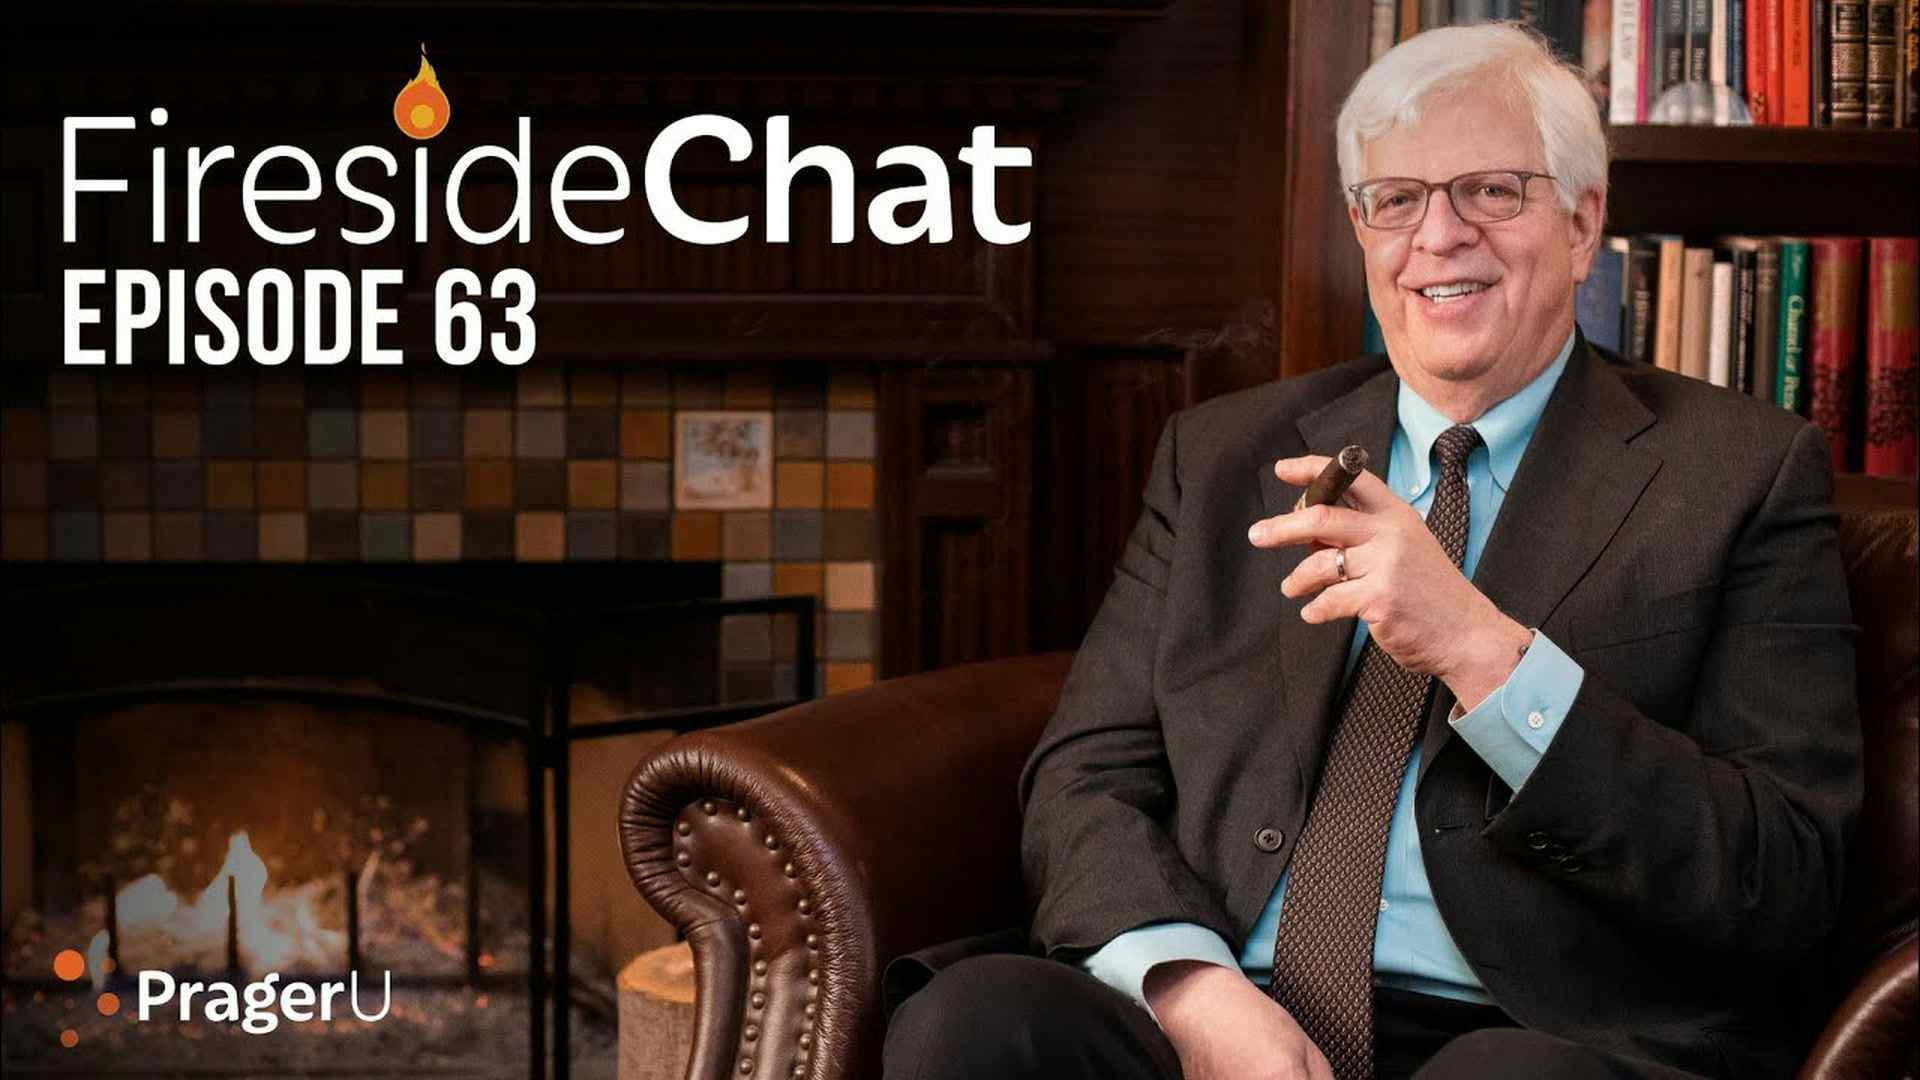 Fireside Chat Ep. 63 - Marriage and Children vs. Career